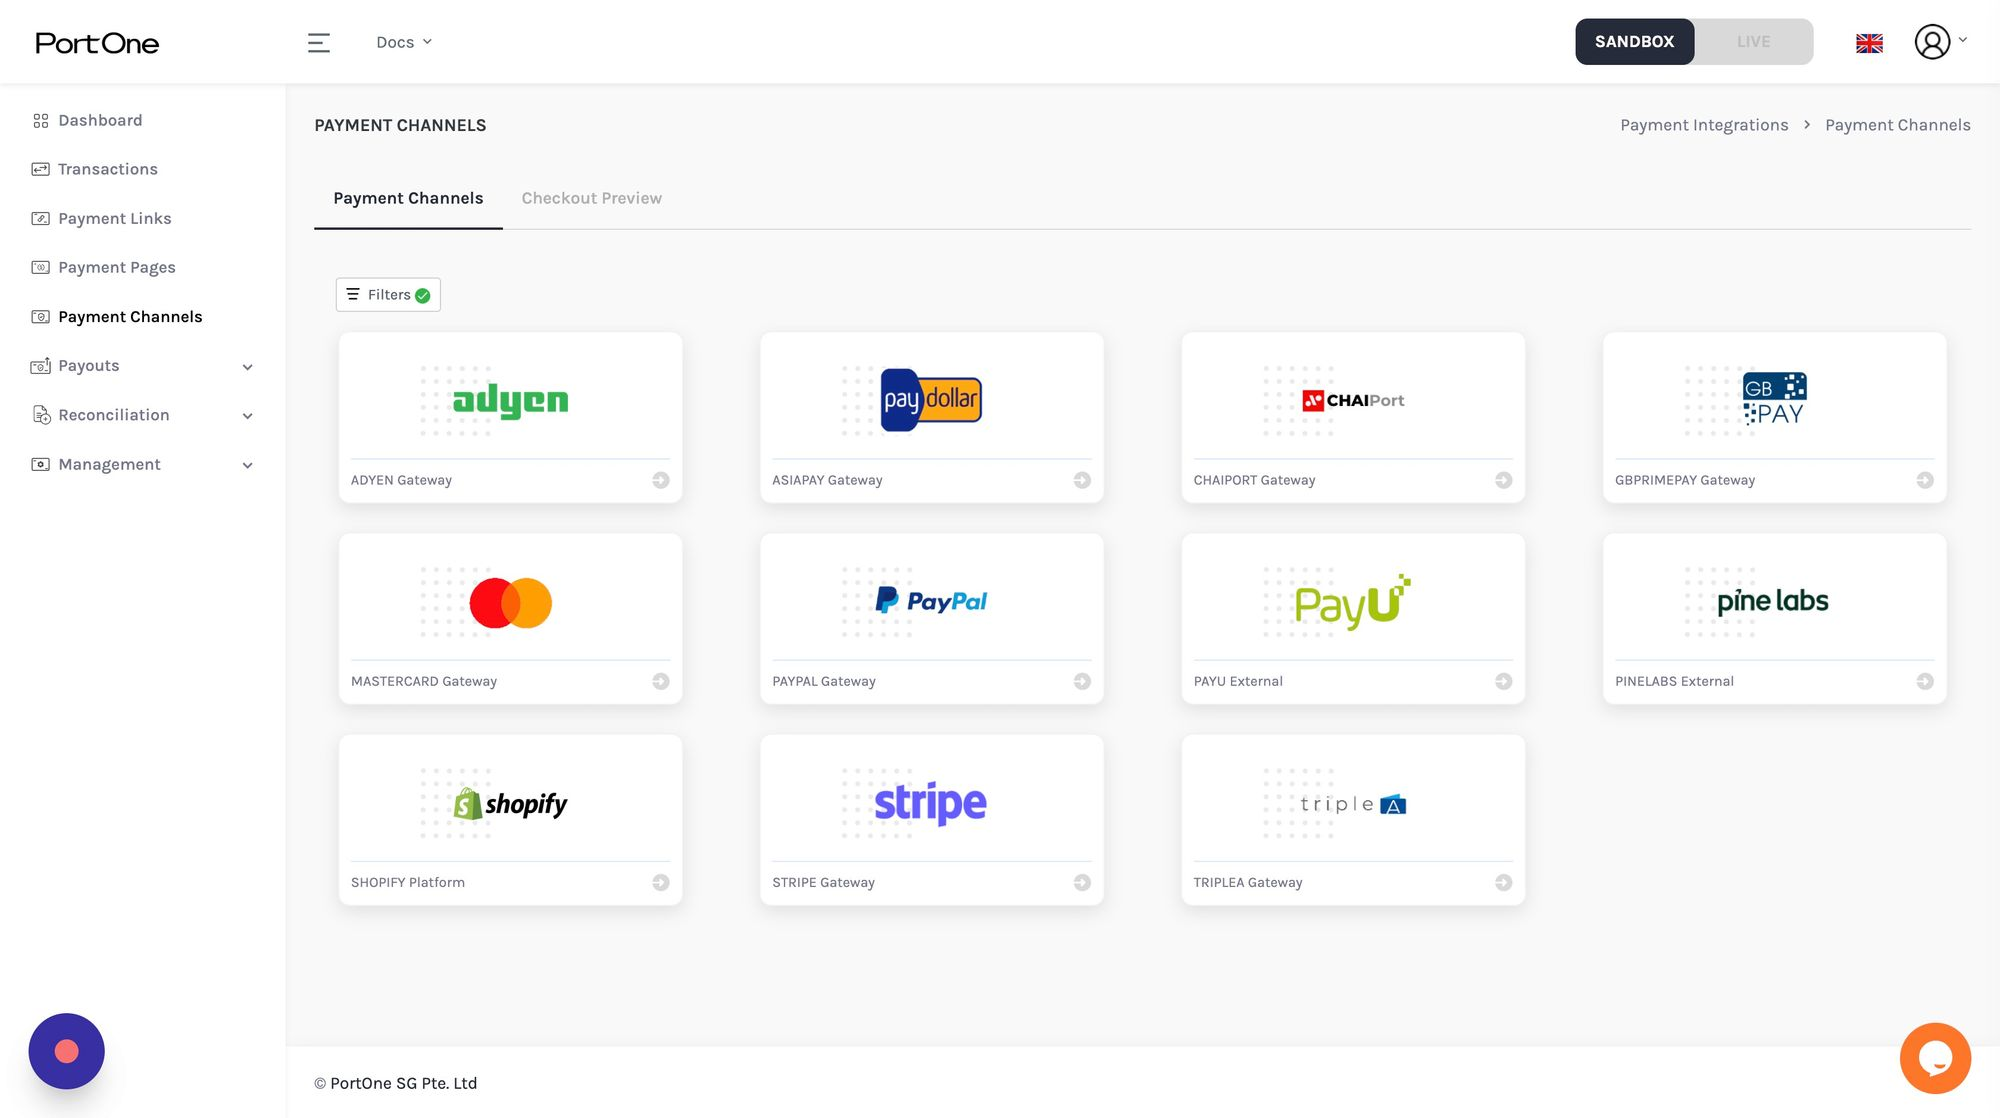 Payment Channels >Filters: Global > Shopify 선택합니다.